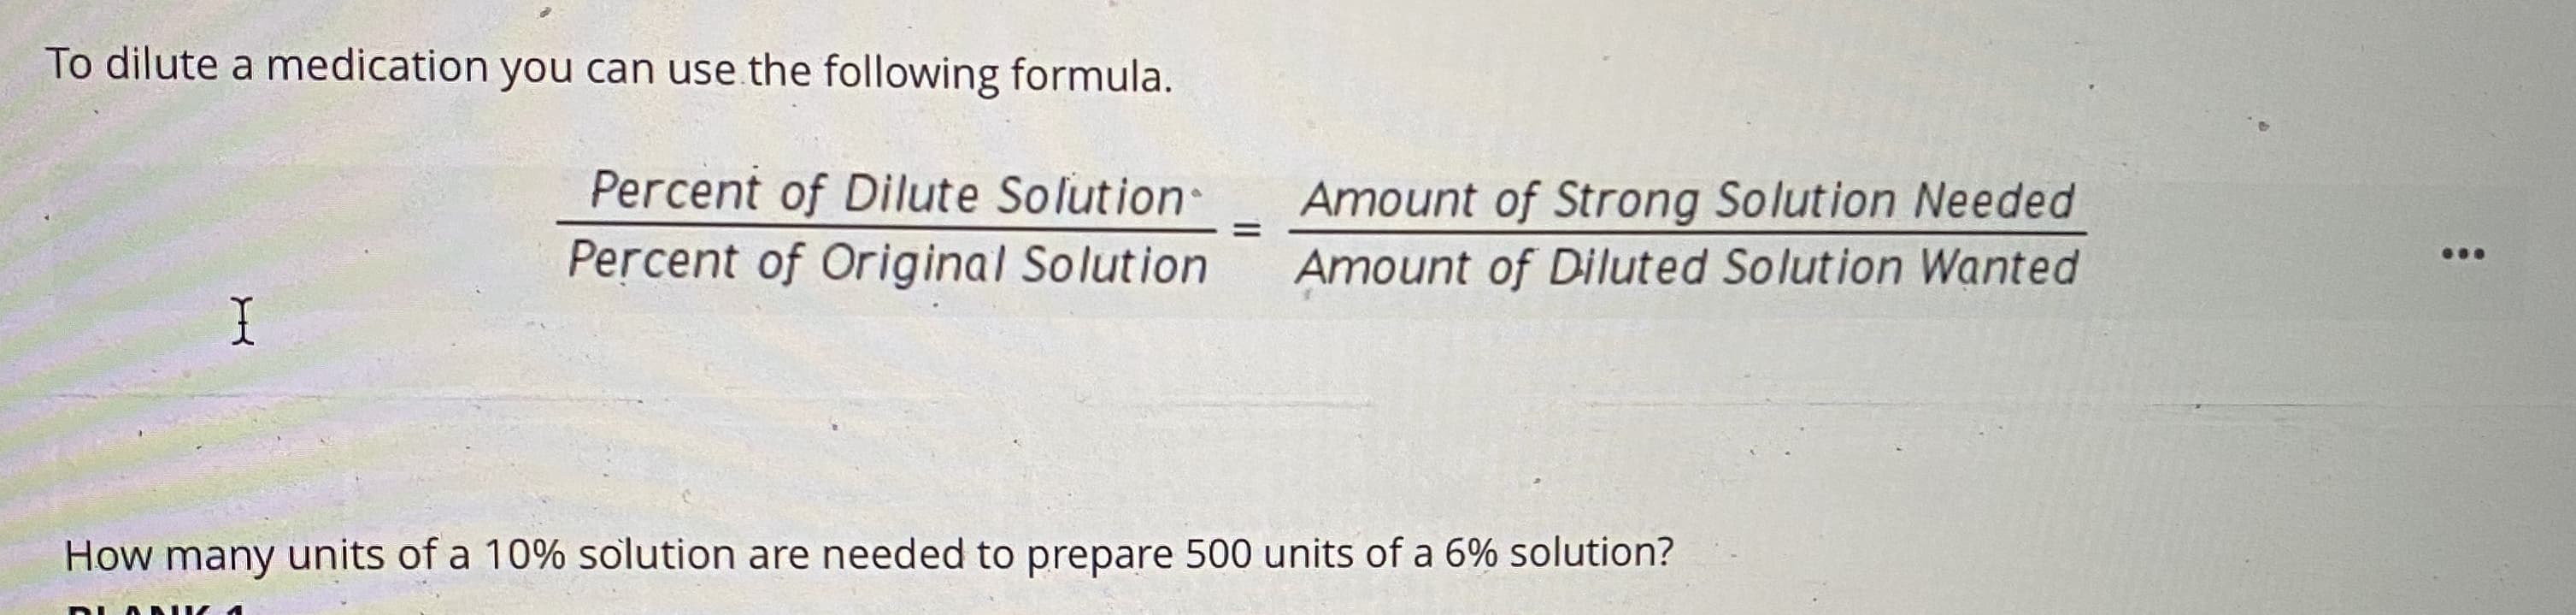 To dilute a medication you can use the following formula.
Percent of Dilute Solution
Amount of Strong Solution Needed
Percent of Original Solution
Amount of Diluted Solution Wanted
How many units of a 10% solution are needed to prepare 500 units of a 6% solution?
